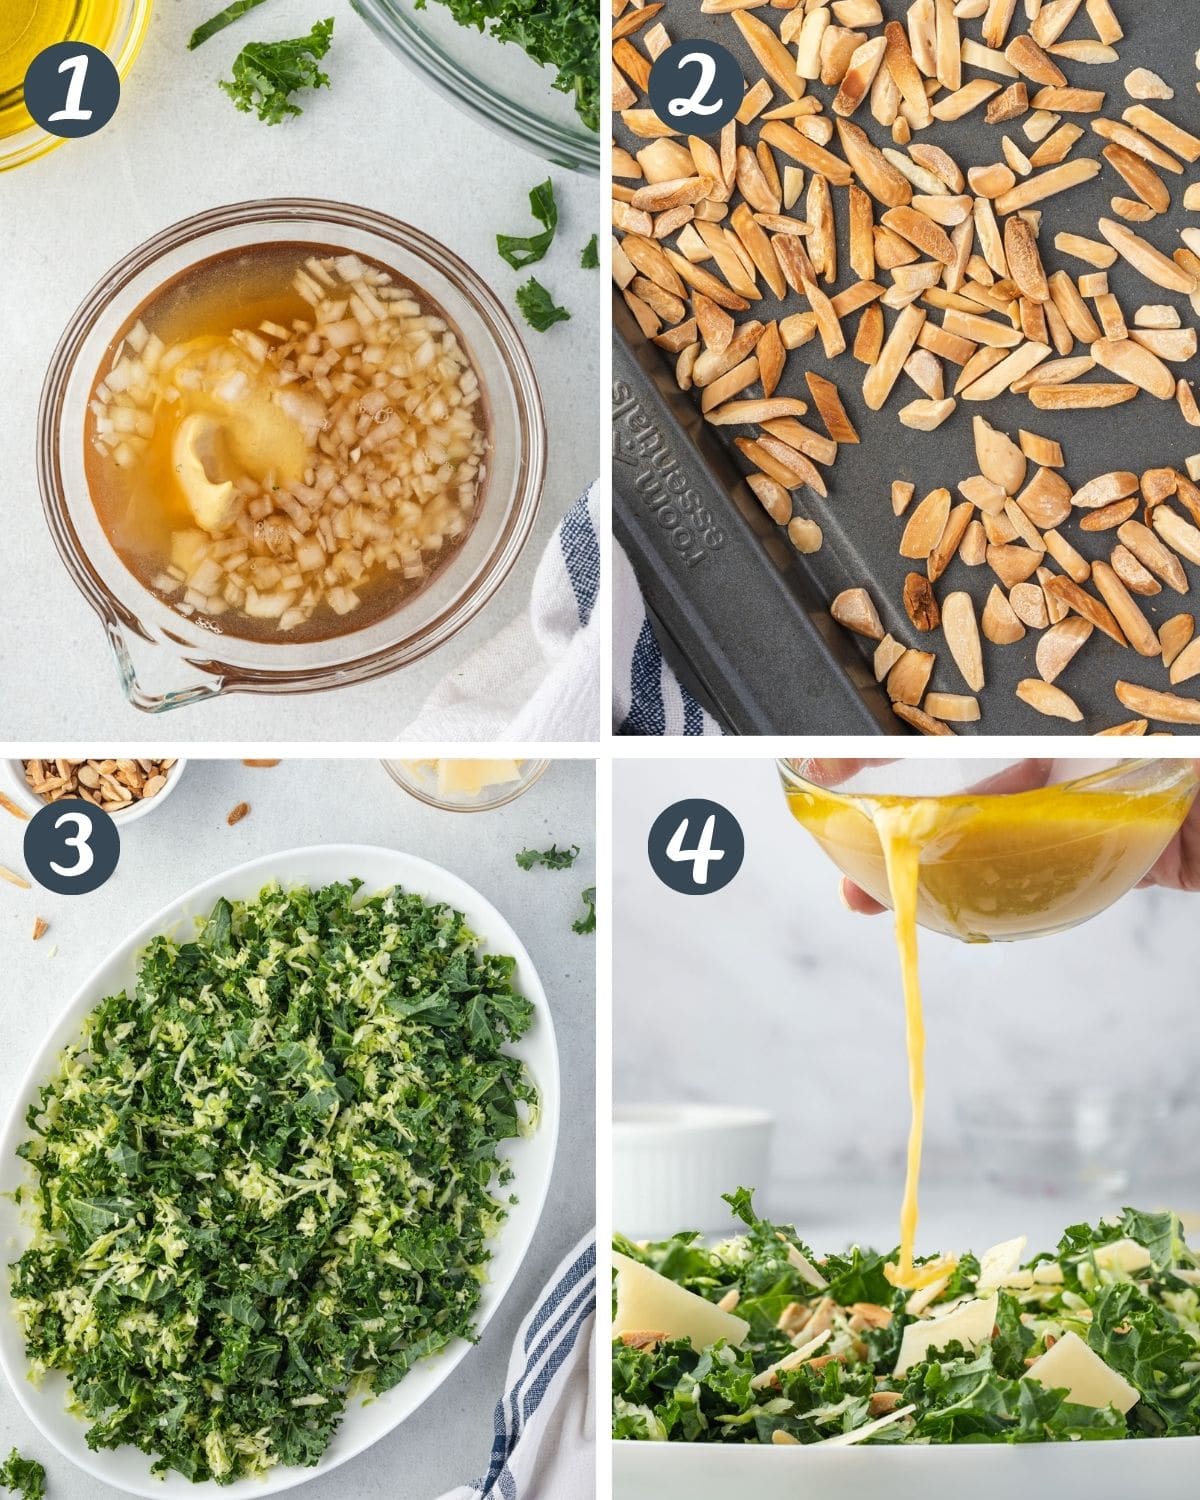 Collage of 4 steps to make kale crunch salad: overhead of dressing, toasted almonds, salad on platter, and pouring dressing.